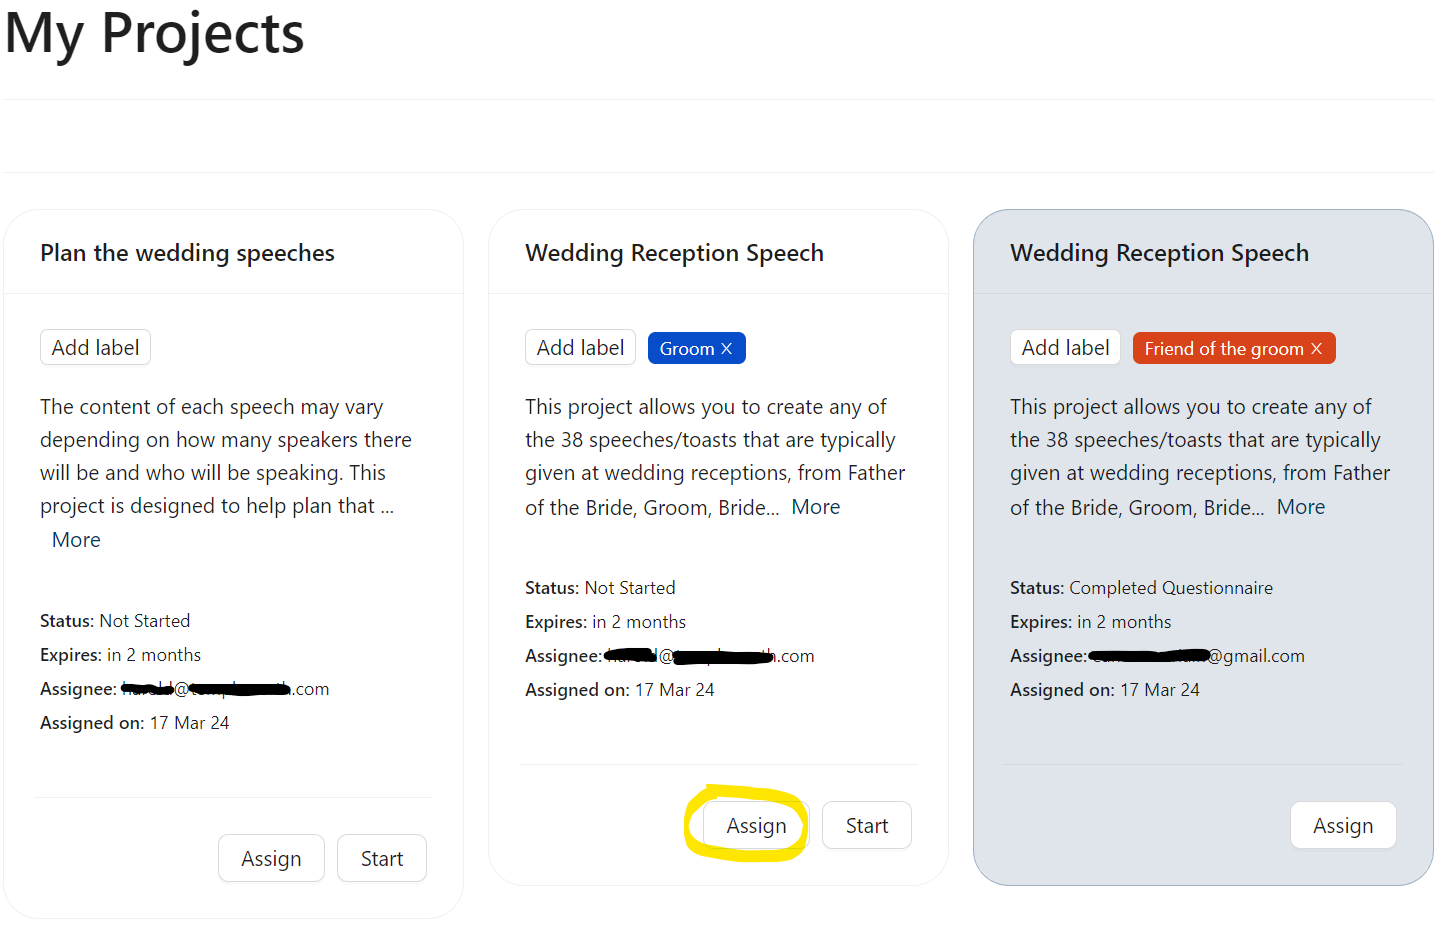 WeWriteSpeeches My Projects page showing speechwriting with start or assign buttons